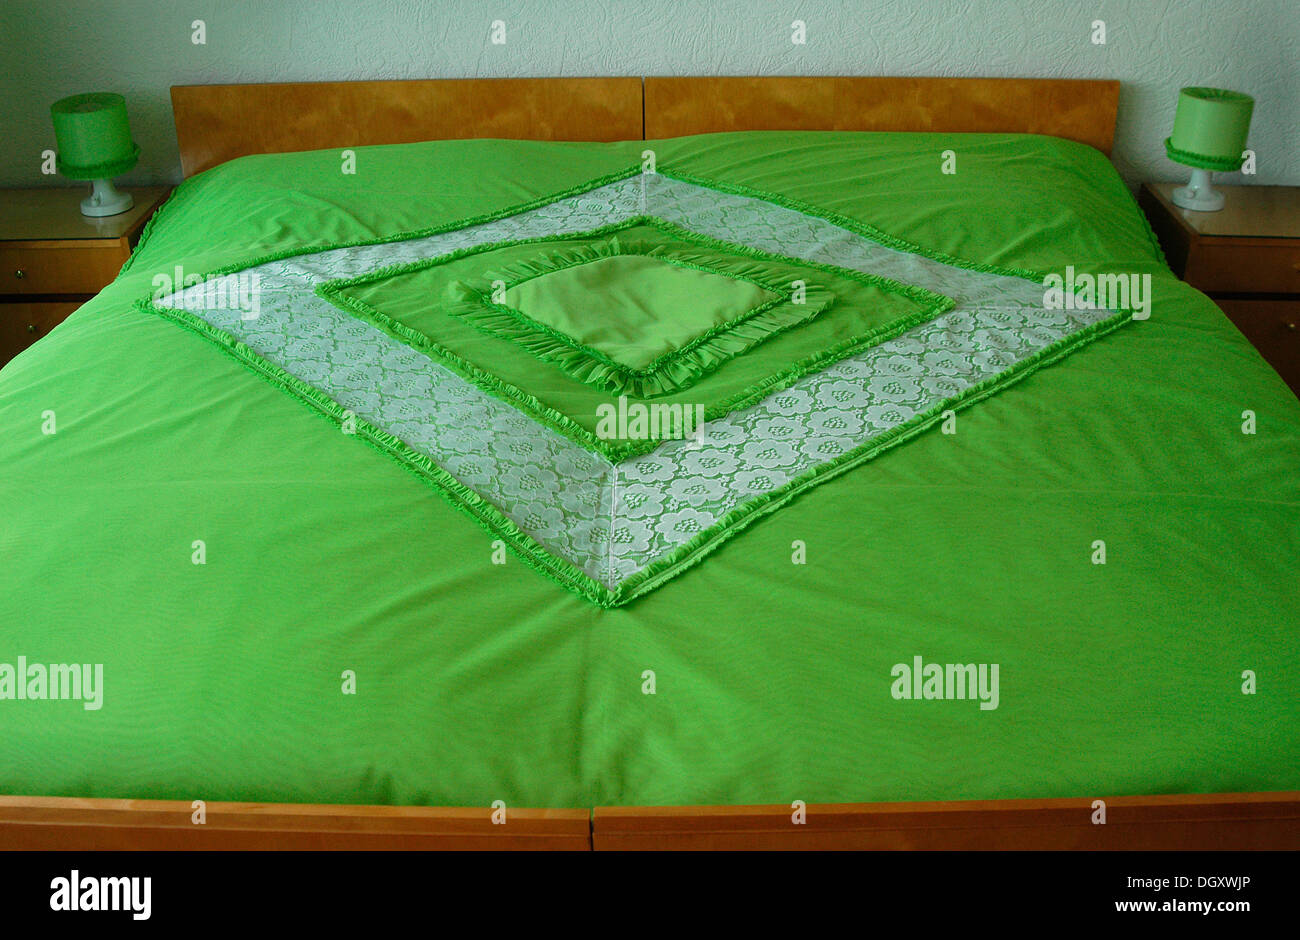 Double bed with a green bedspread Stock Photo